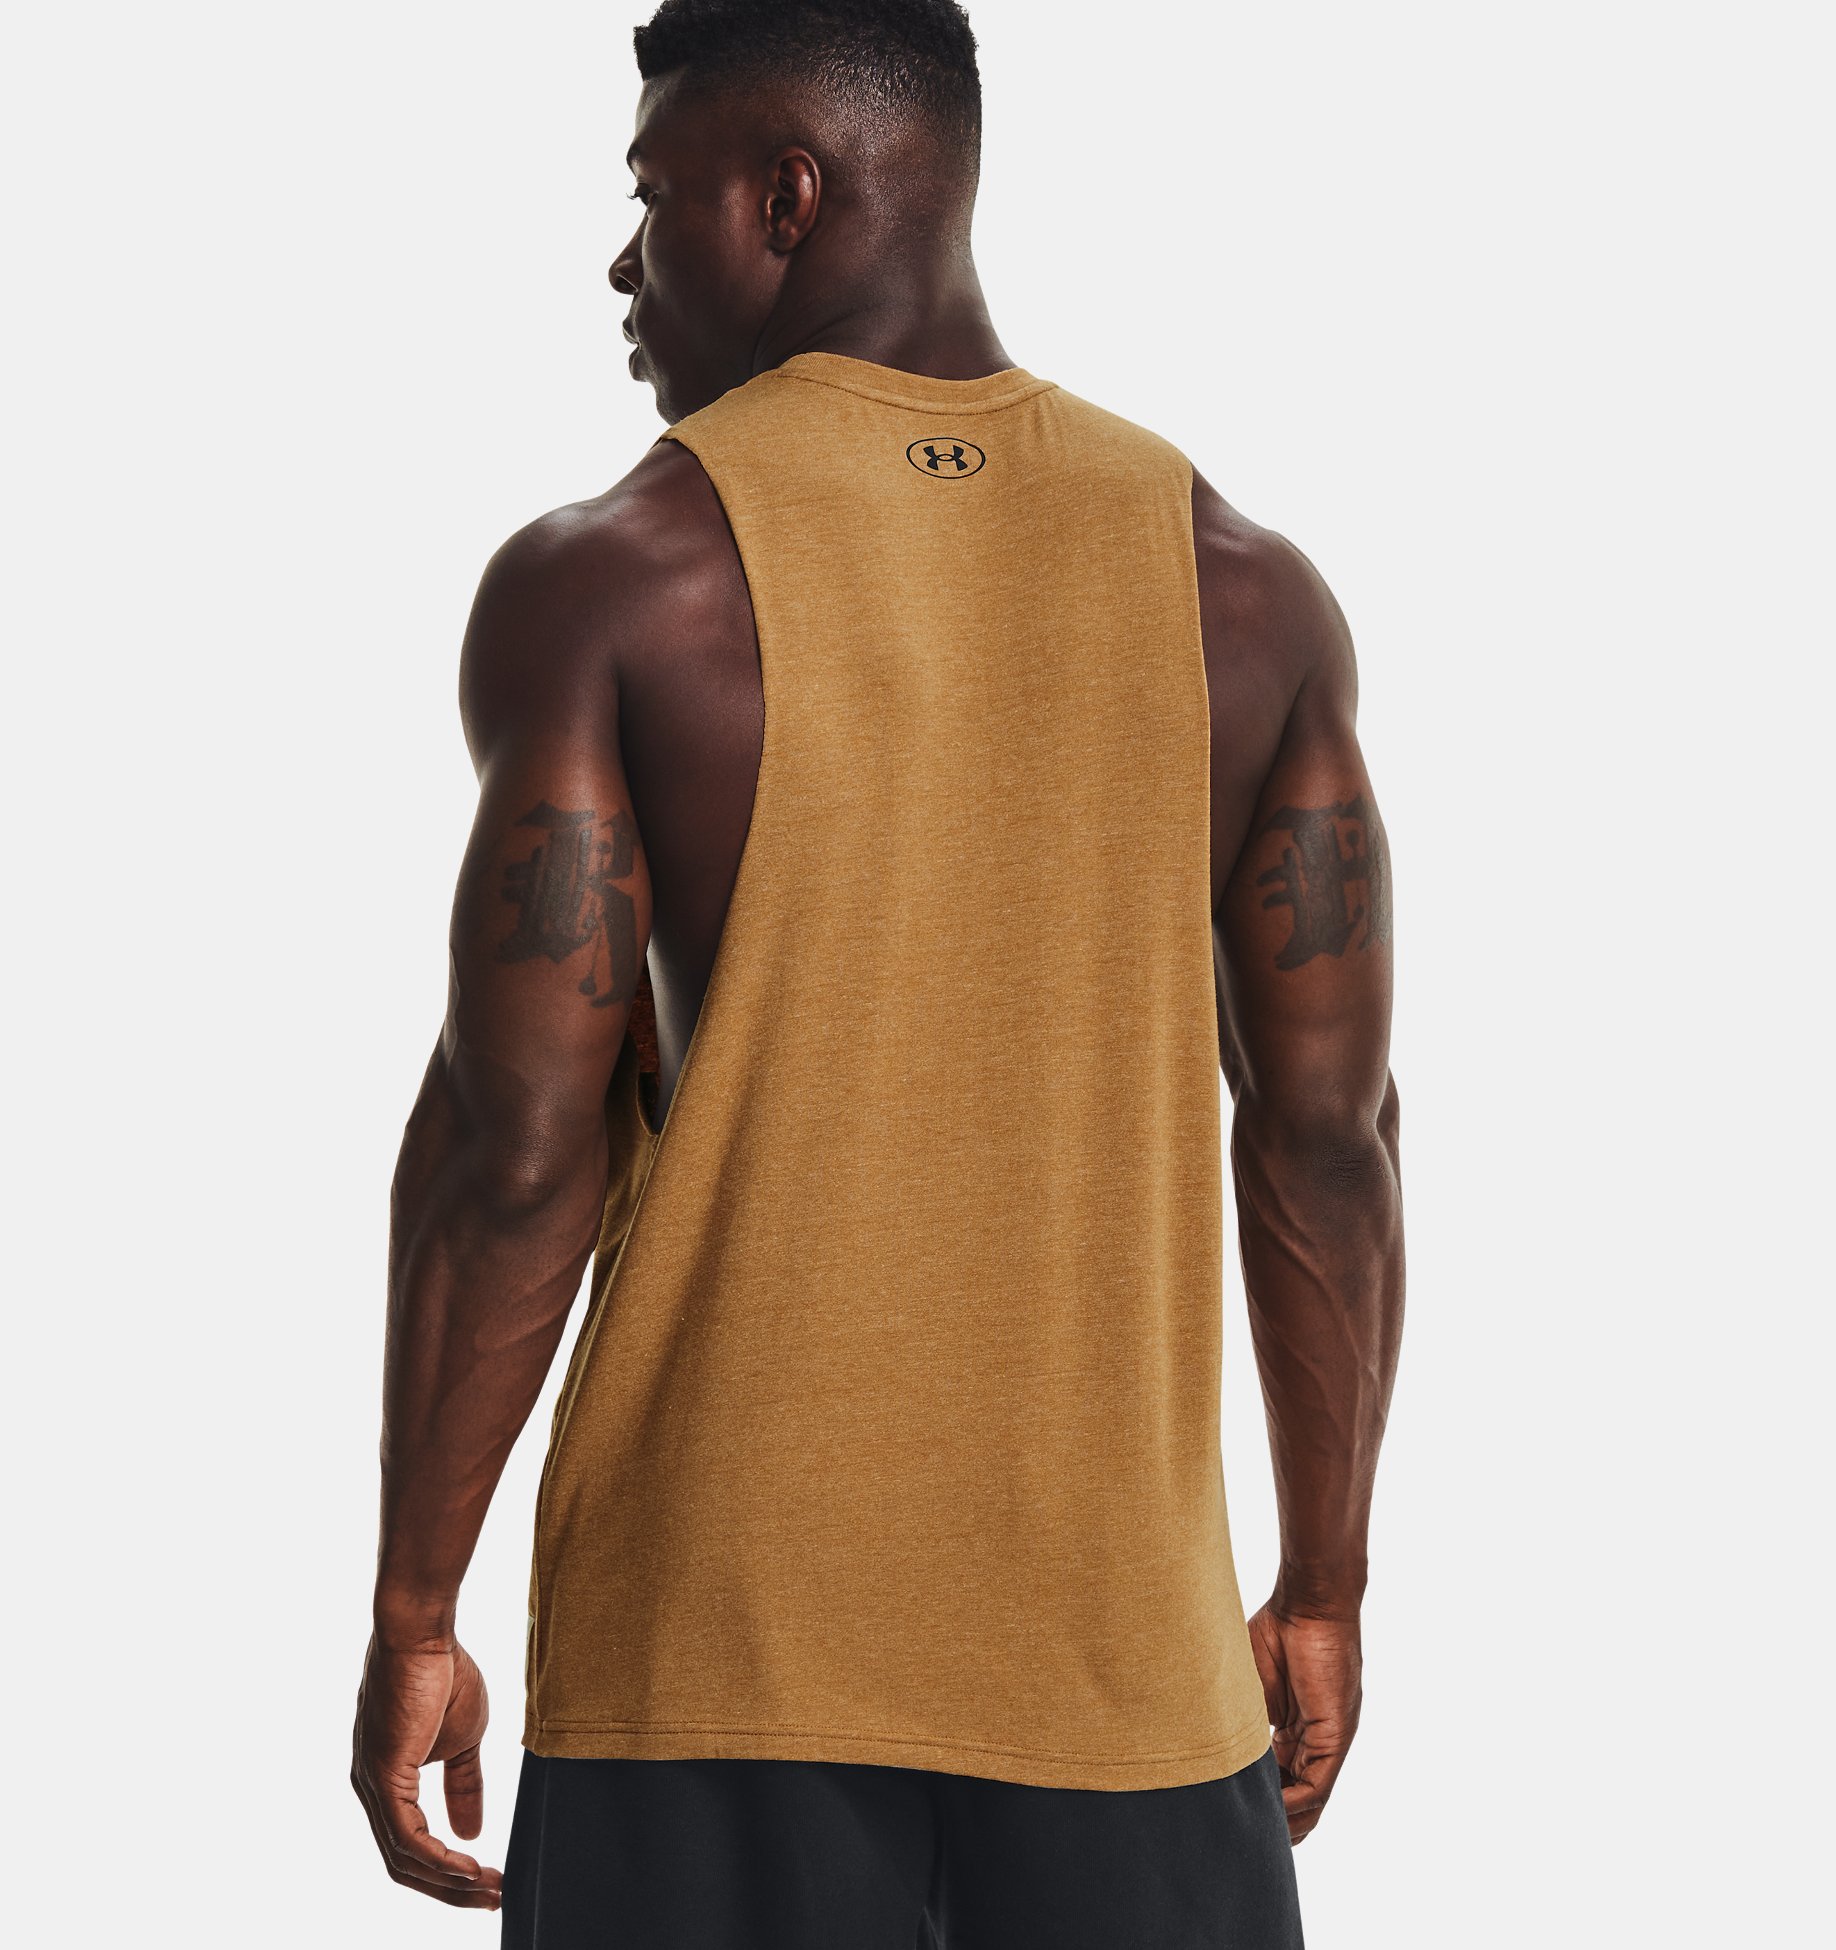 Under Armour Men's Project Rock Sweat Activated Graphic Tank Top 1364745-011 